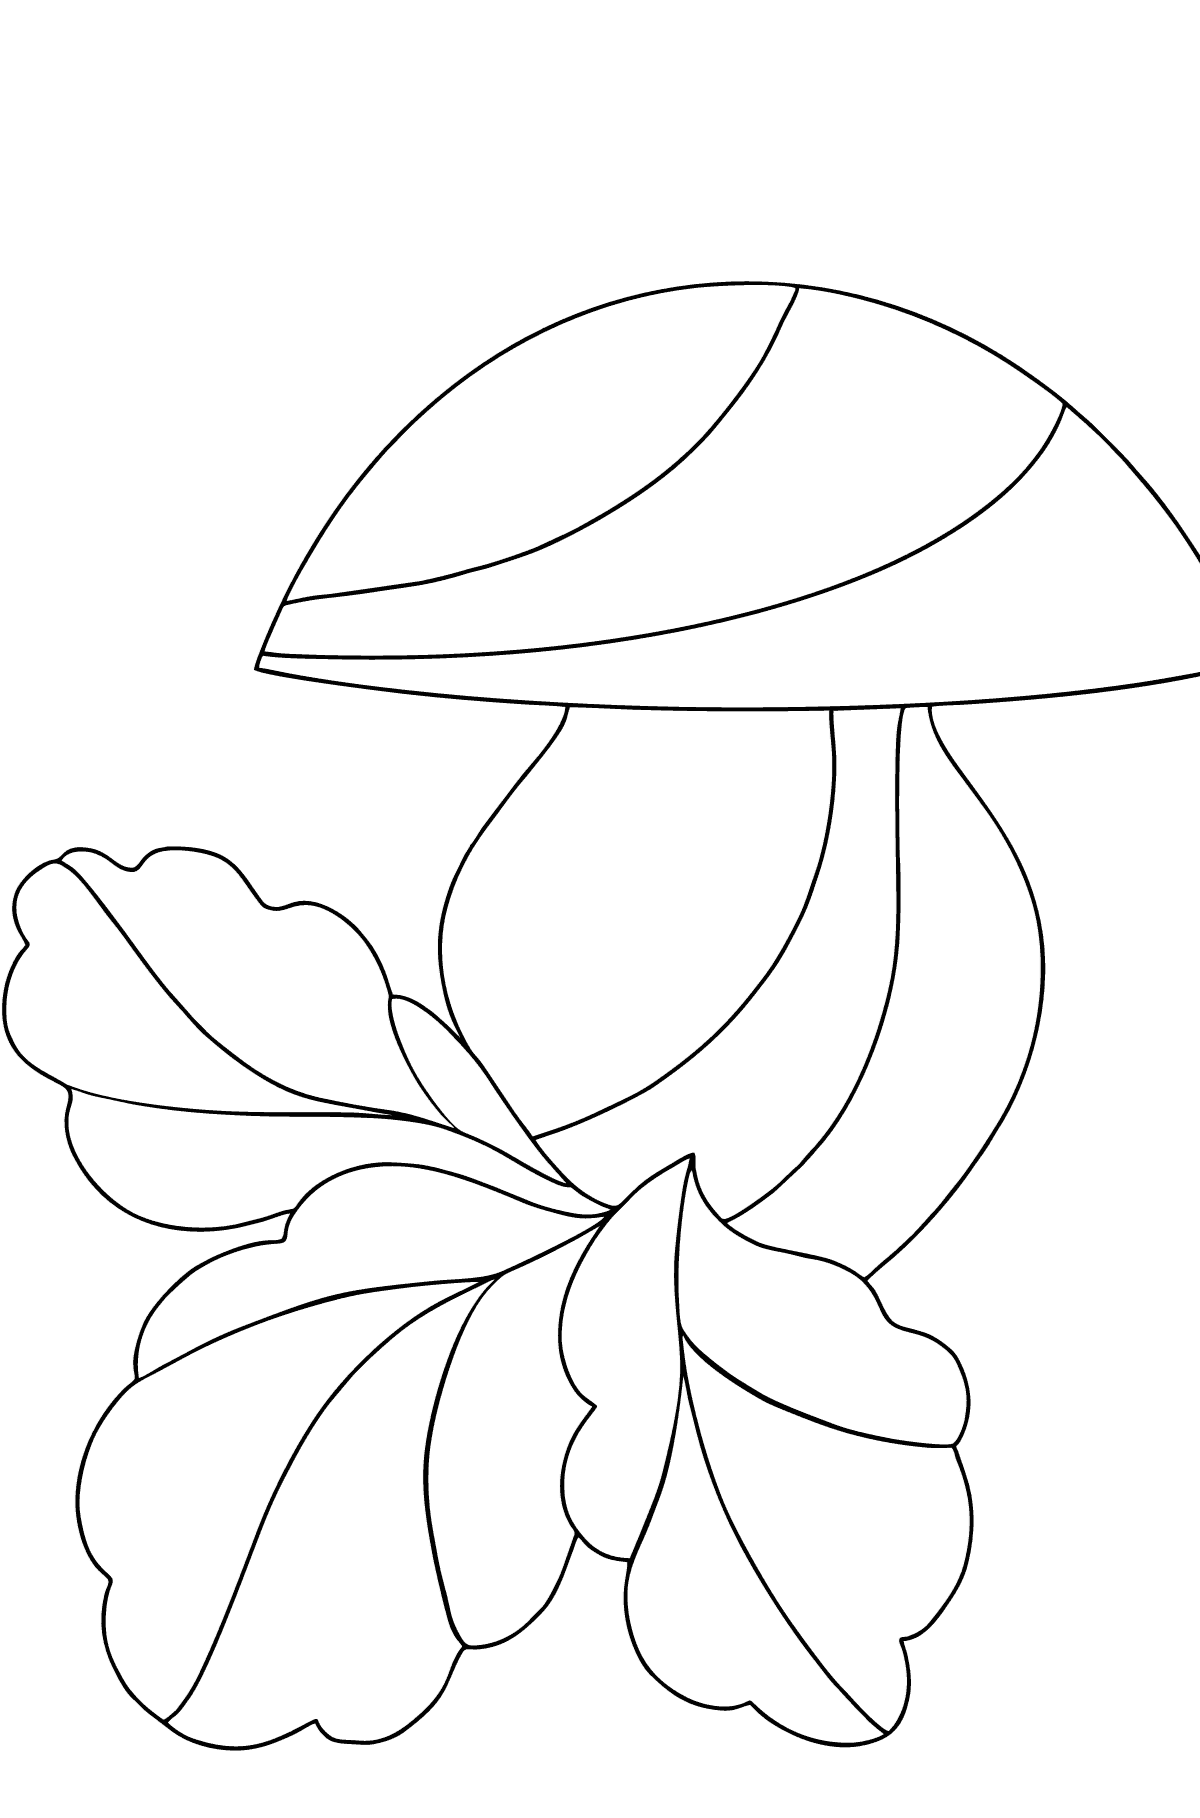 Autumn Coloring Page - Mushroom Harvest Time for Kids 